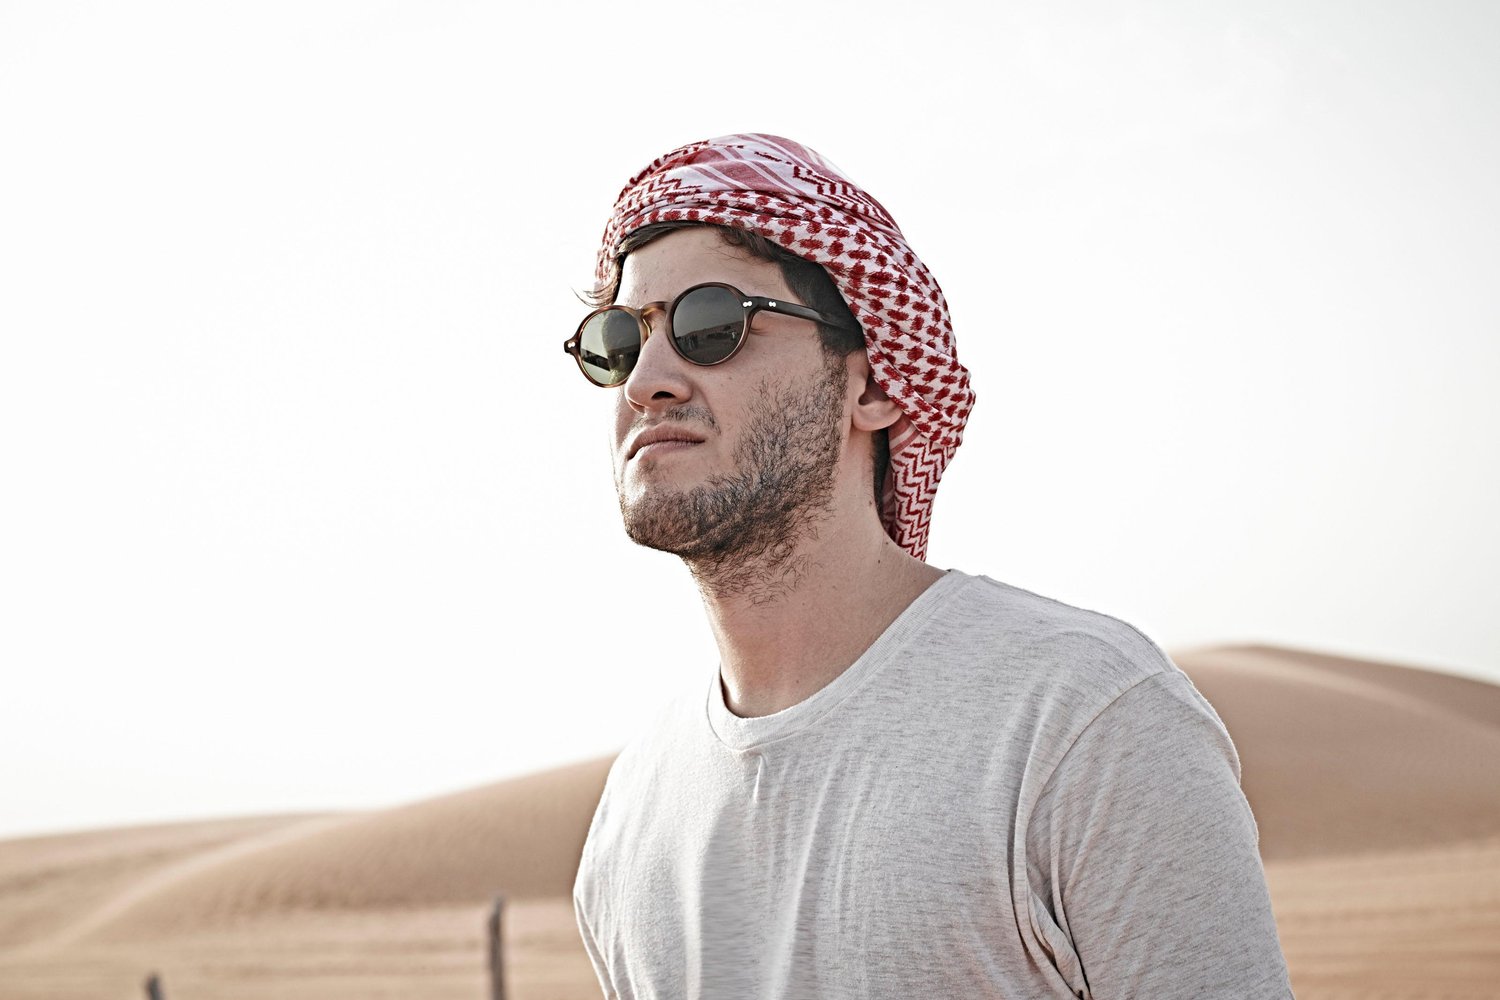 Music producer Harry Bauer Rodrigues, aka Baauer, at the Dubai Desert Conservation Reserve in the United Arab Emirates on April 22, 2014.